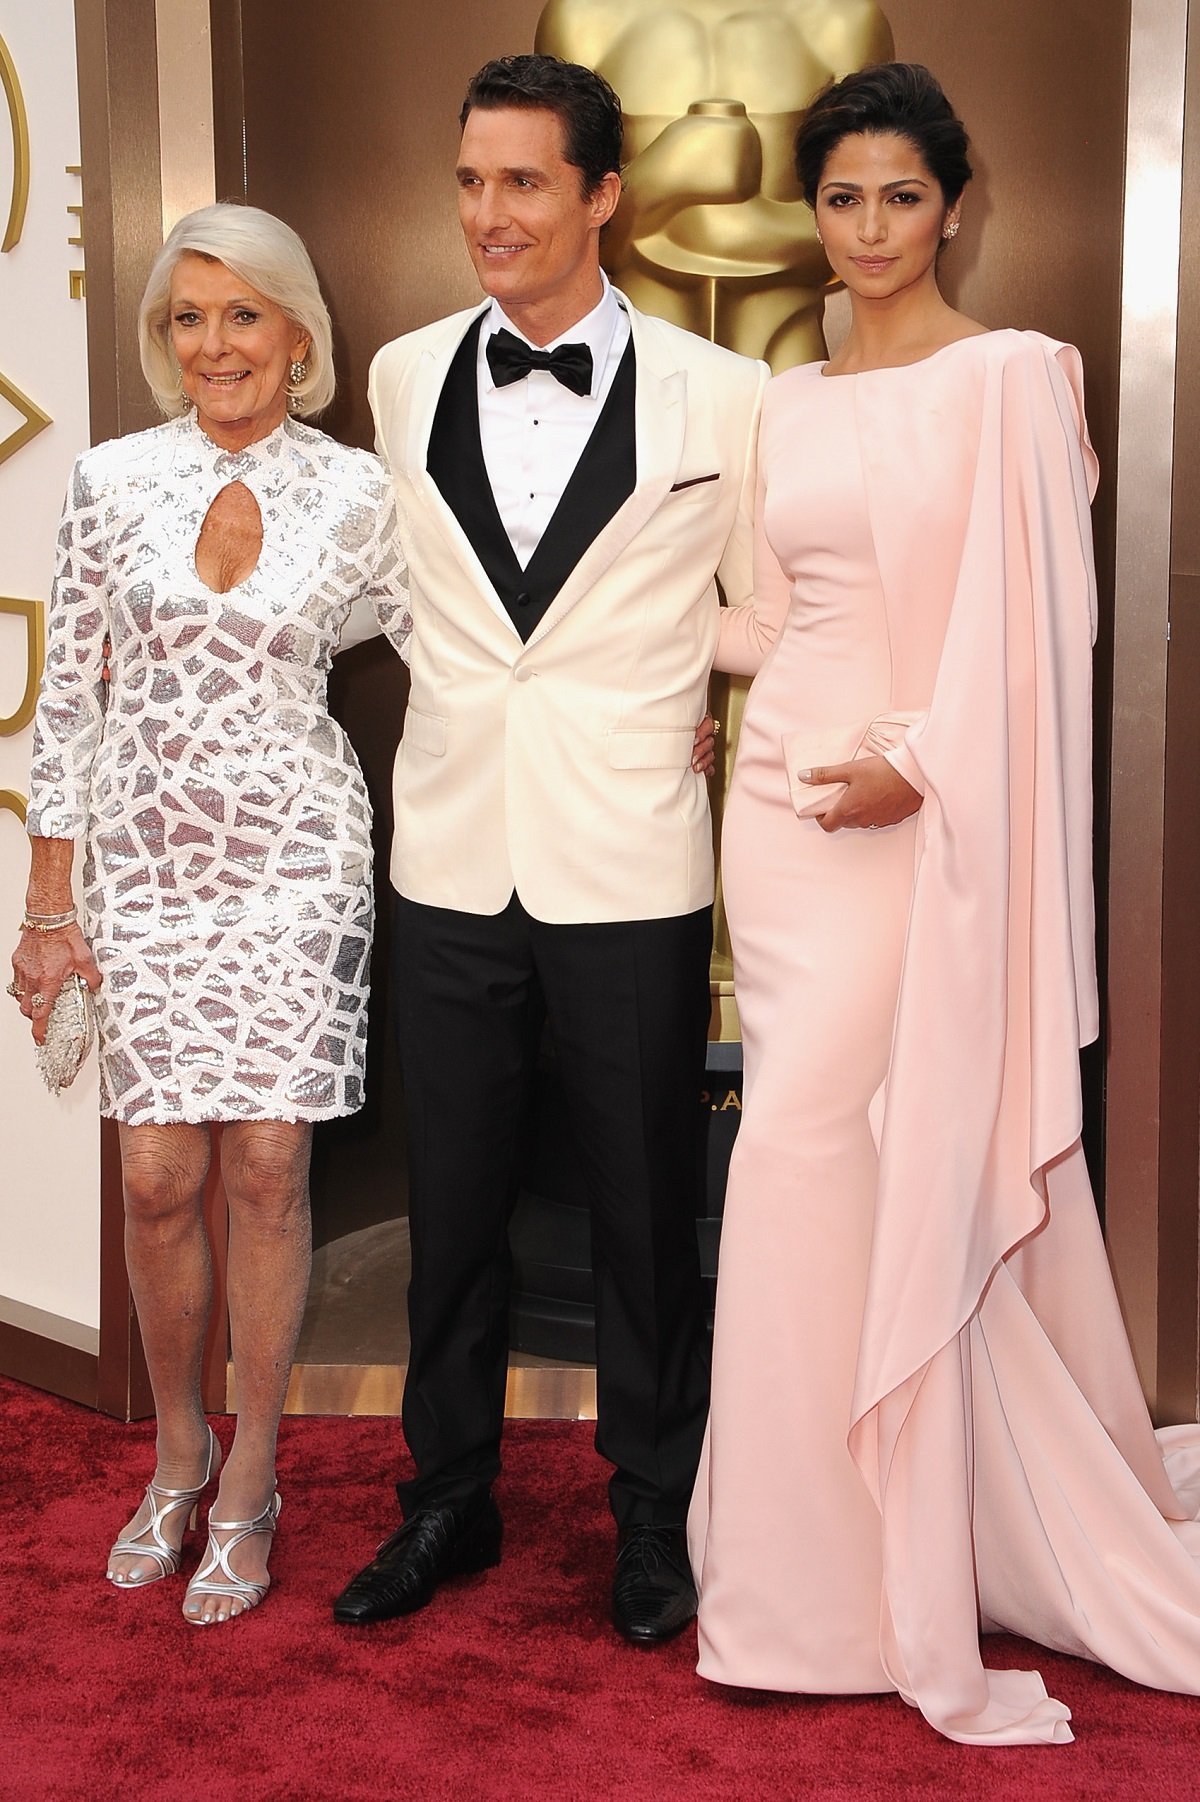 Matthew McConaughey at the 2014 Oscars on the red carpet with his mom, Mary "Kay" McConaughey, and Camila Alves